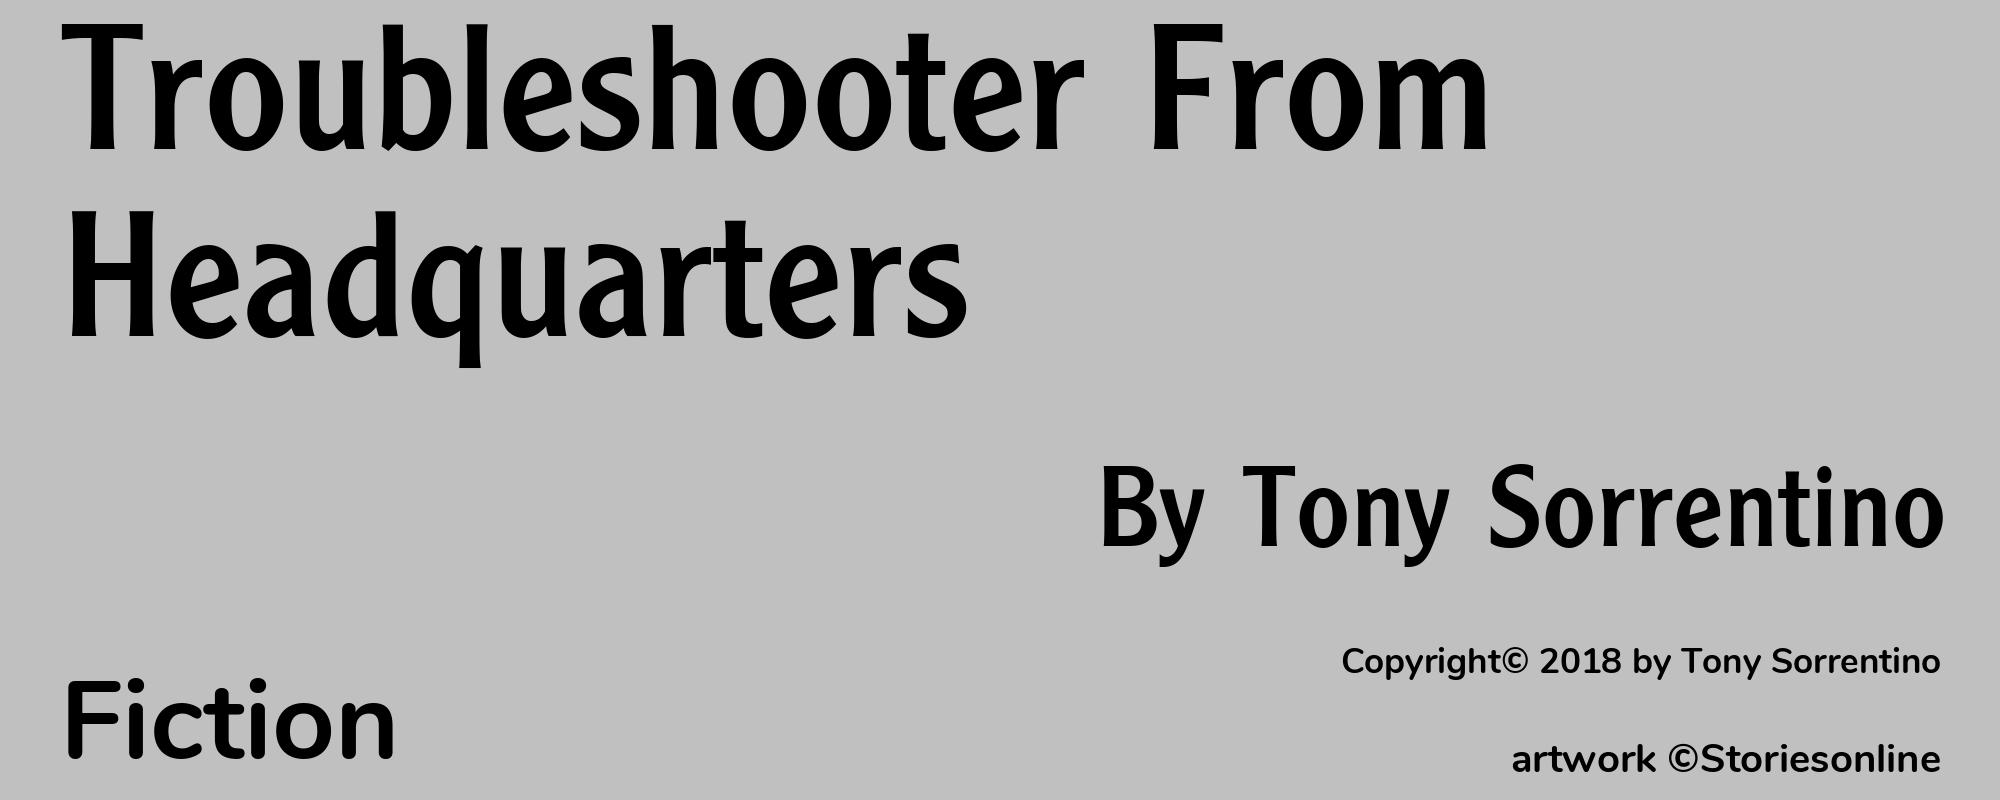 Troubleshooter From Headquarters - Cover